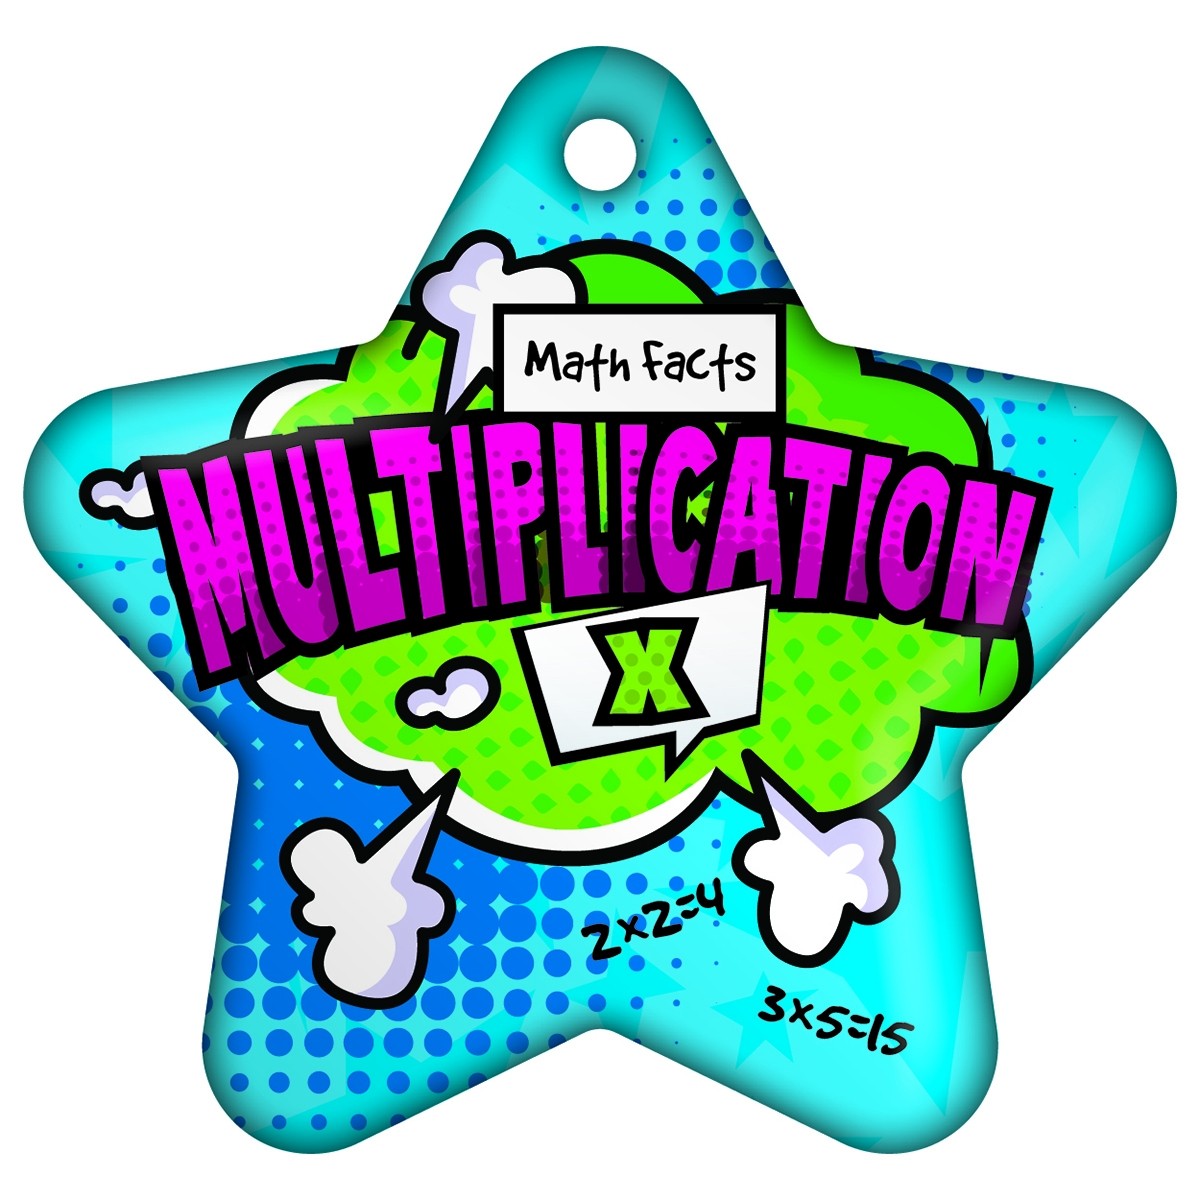 Stock facts star tags. Multiplication clipart design math